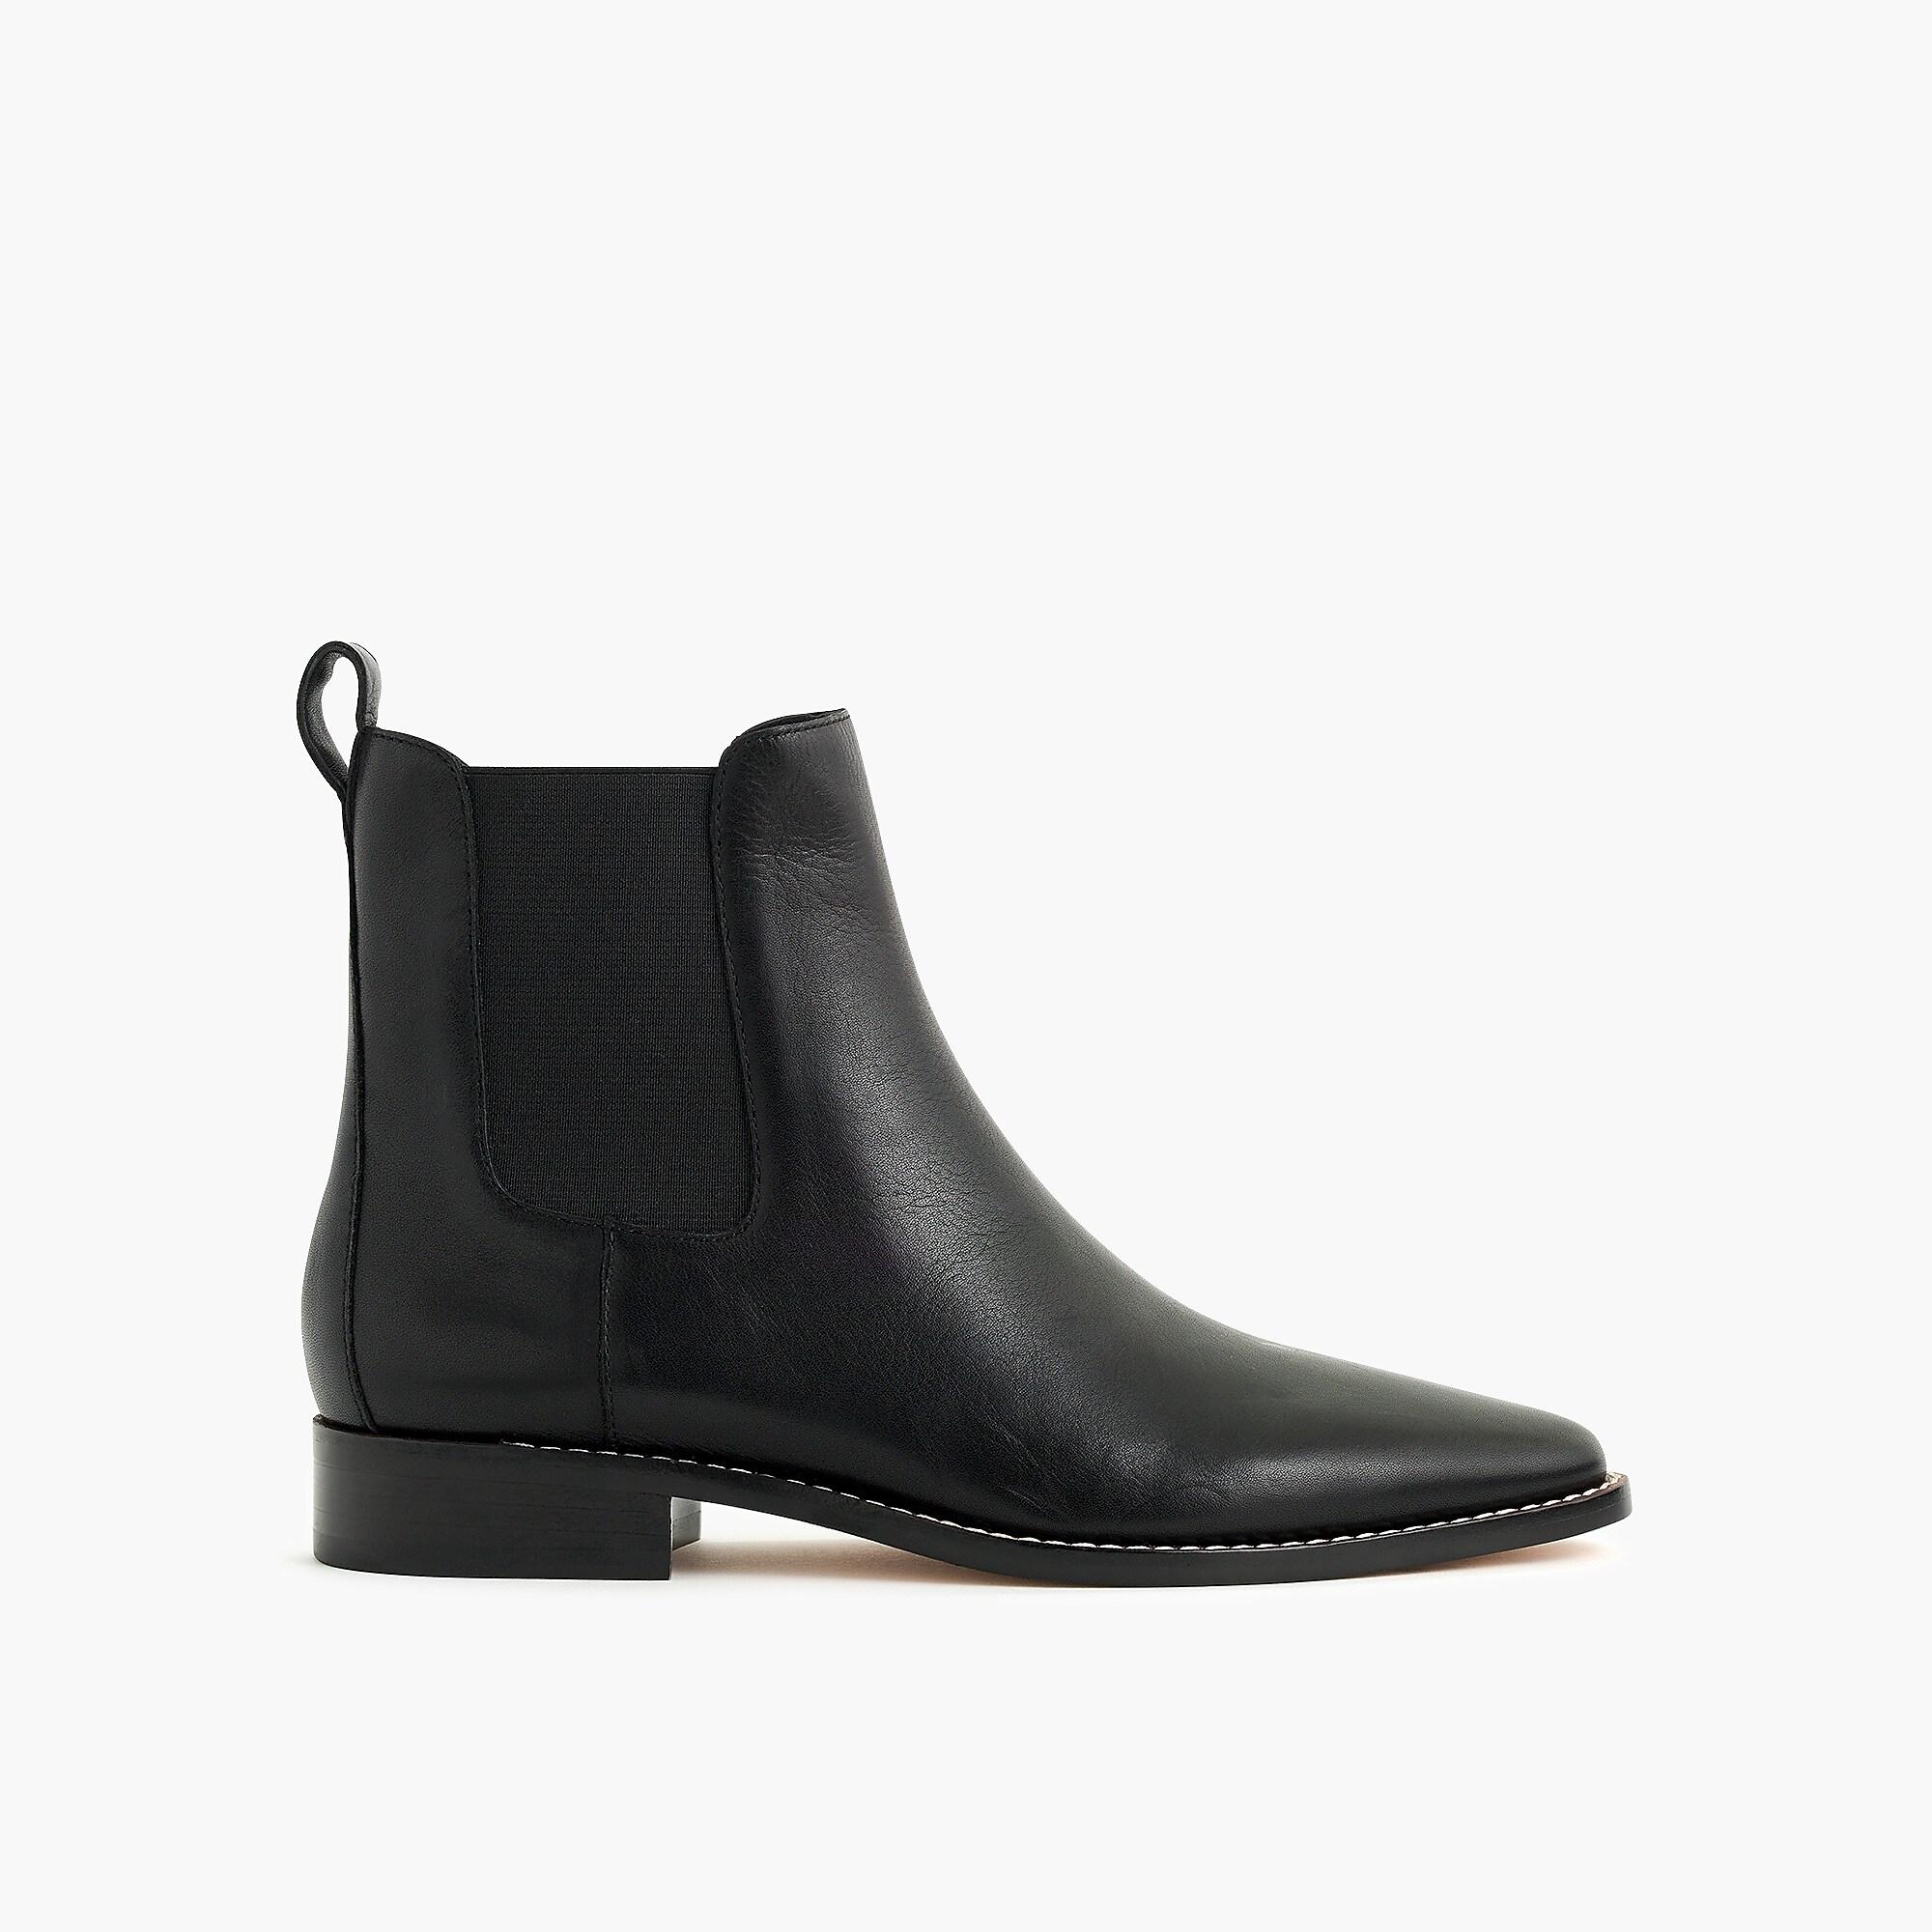 J.Crew Leather Chelsea Boots in Black - Lyst